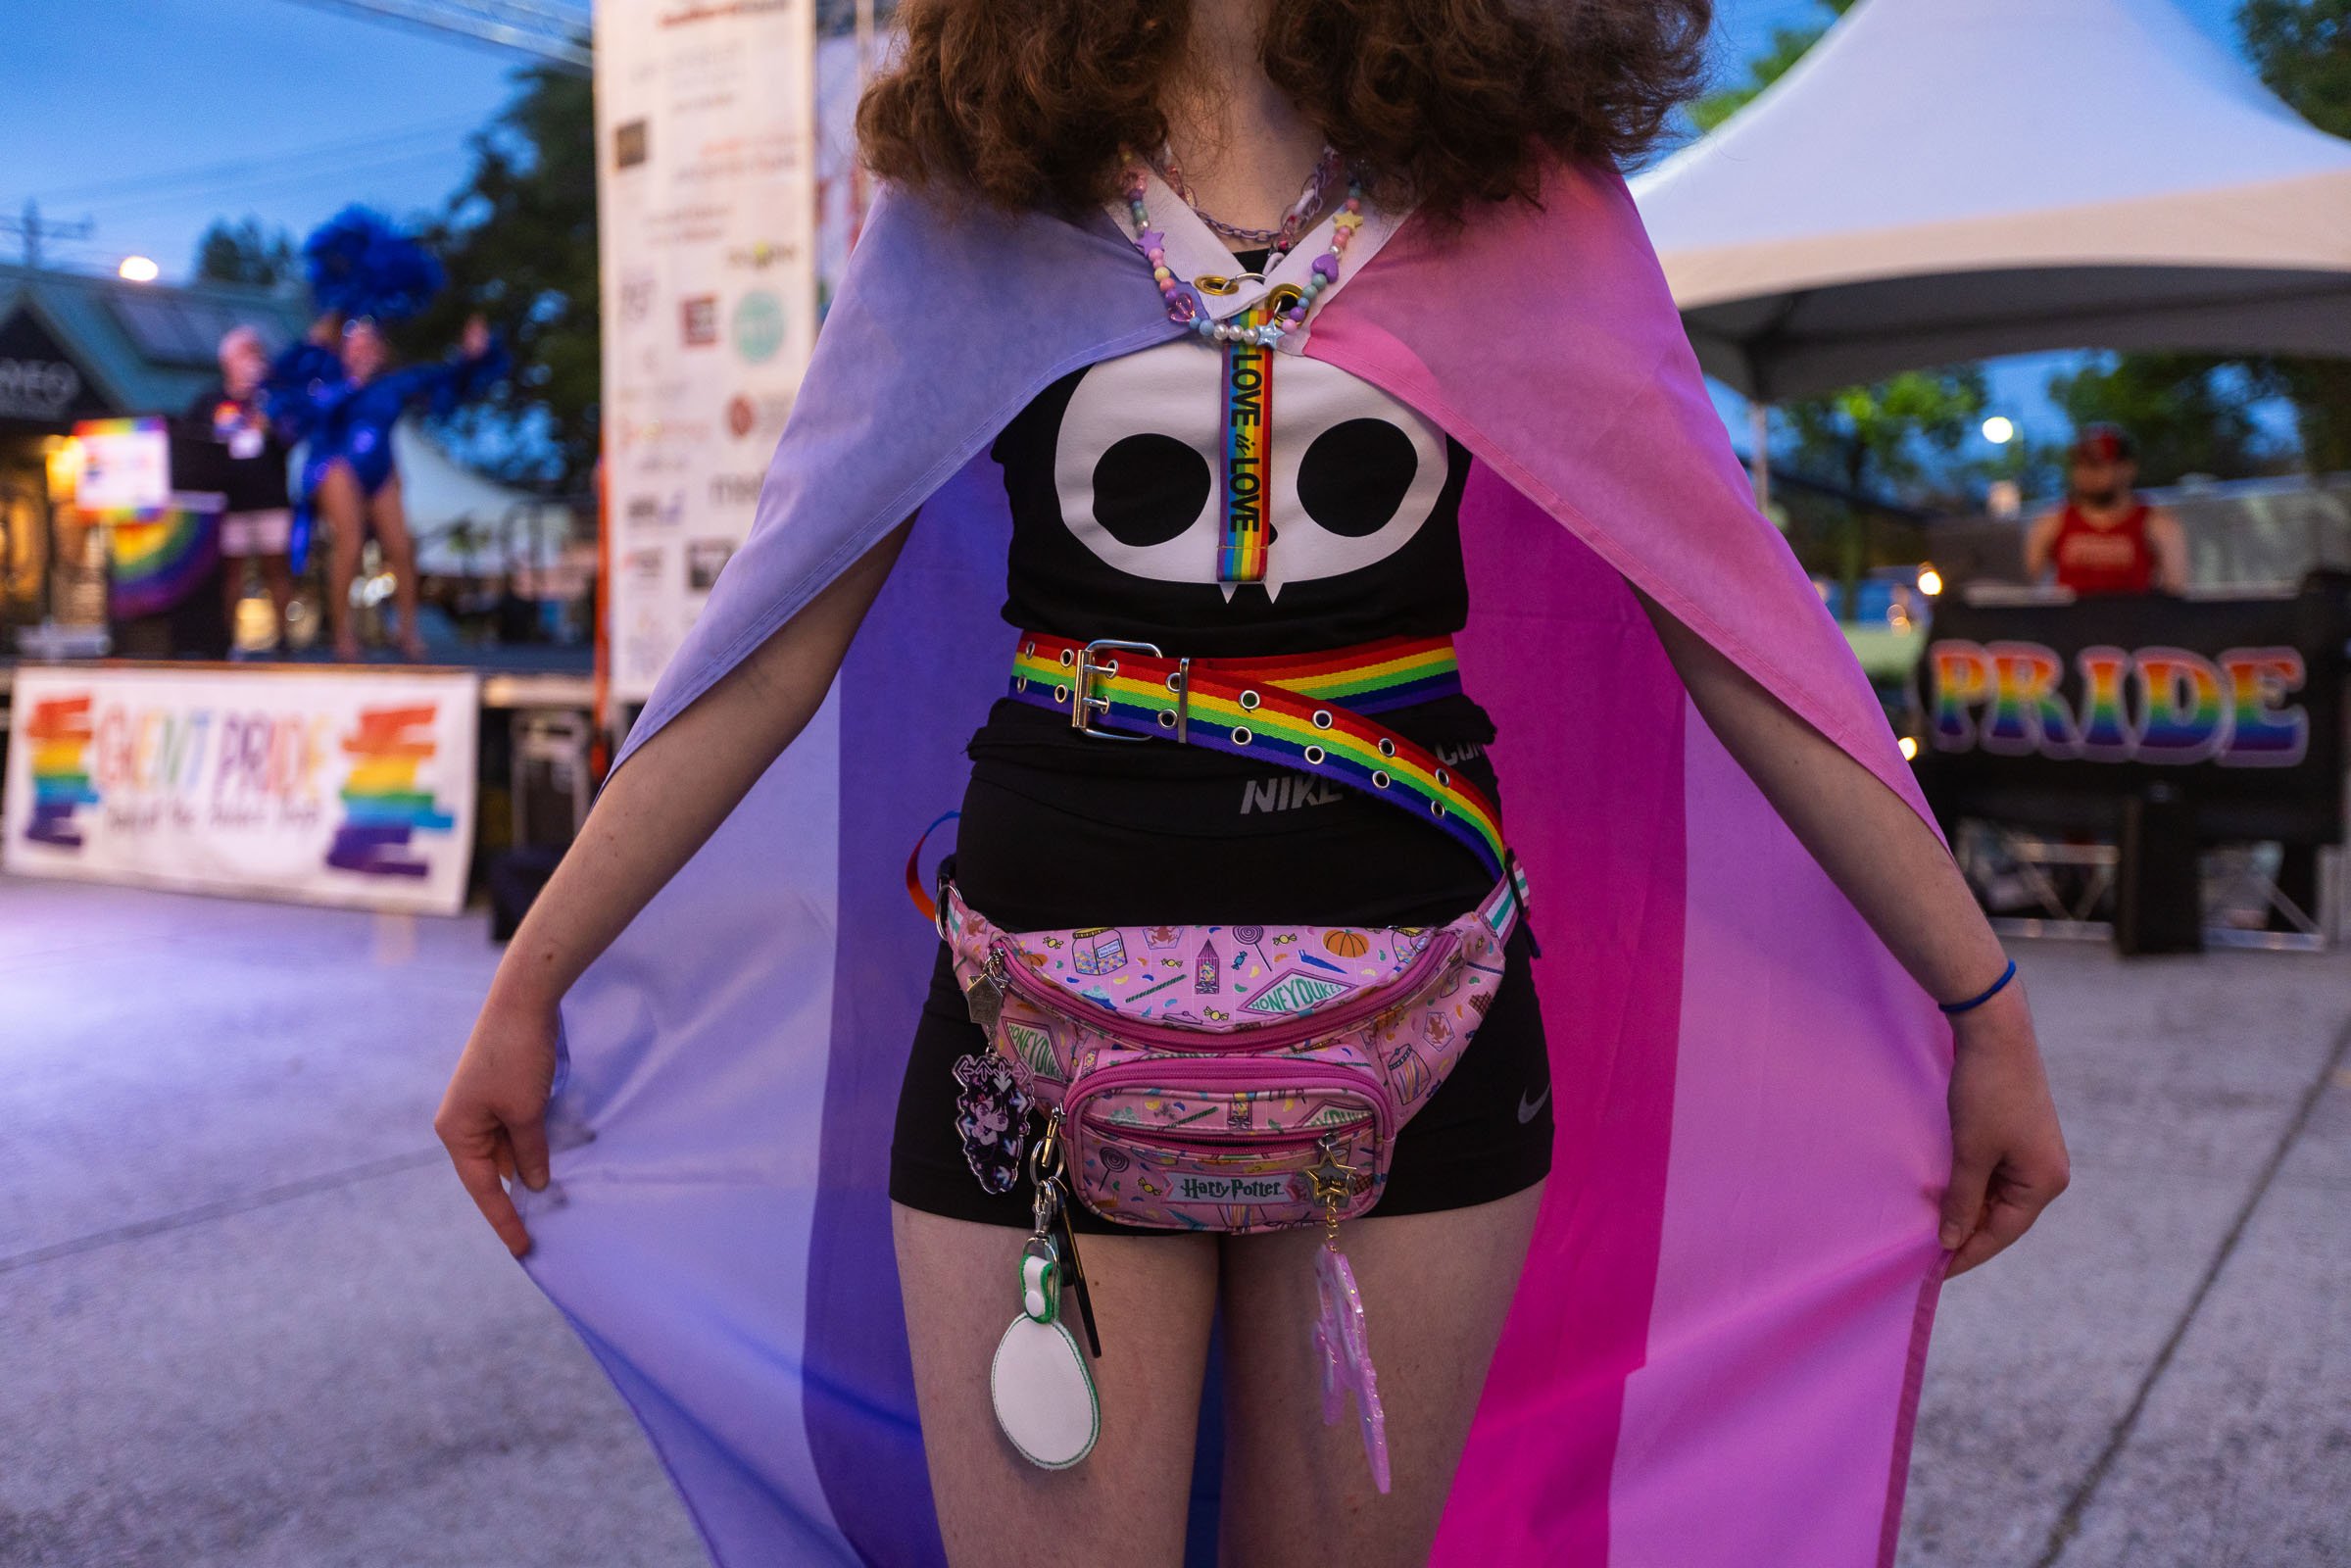  Neo Patterson, 14, of Virginia Beach, Va., poses at the Ghent Pride Party in Norfolk, Va. on Tuesday, June 20, 2023. Patterson came out as omnisexual three years prior. “Pride means embracing who you are as a person.” (Tess Crowley / The Virginian-P